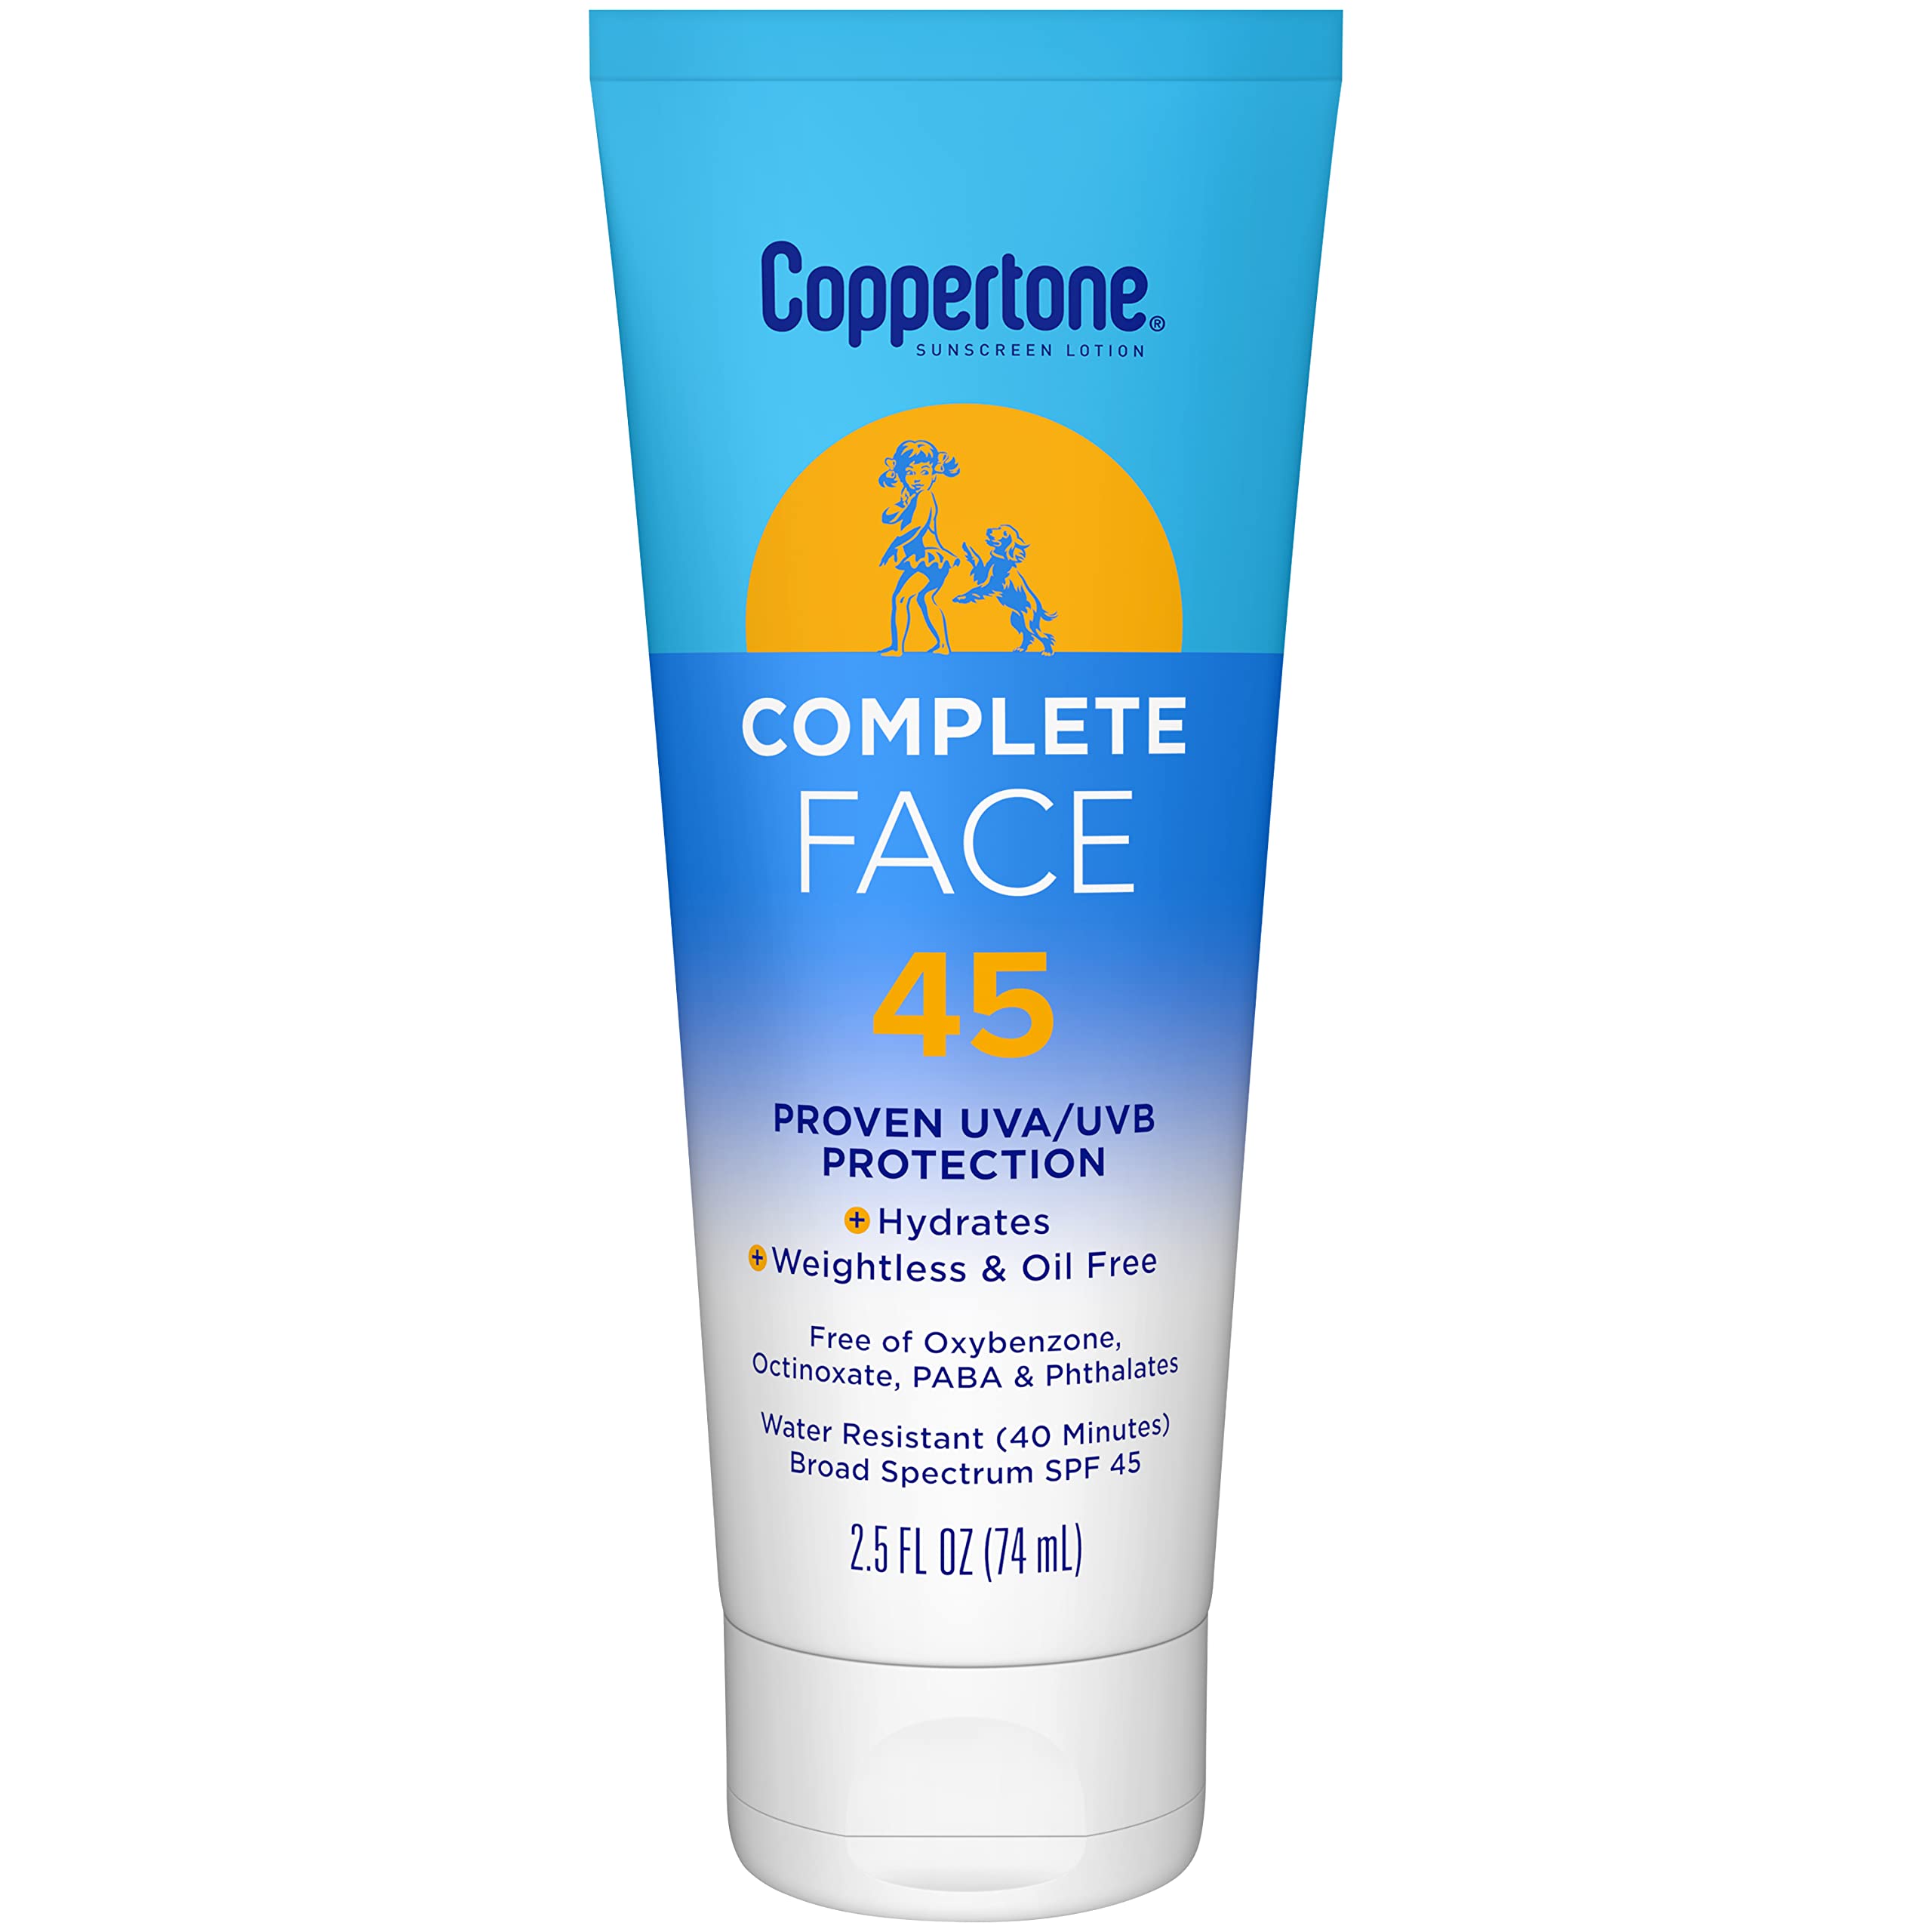 Coppertone Complete SPF 45 Face Sunscreen, Water Resistant Face Sunscreen, 2.5 fl. oz.